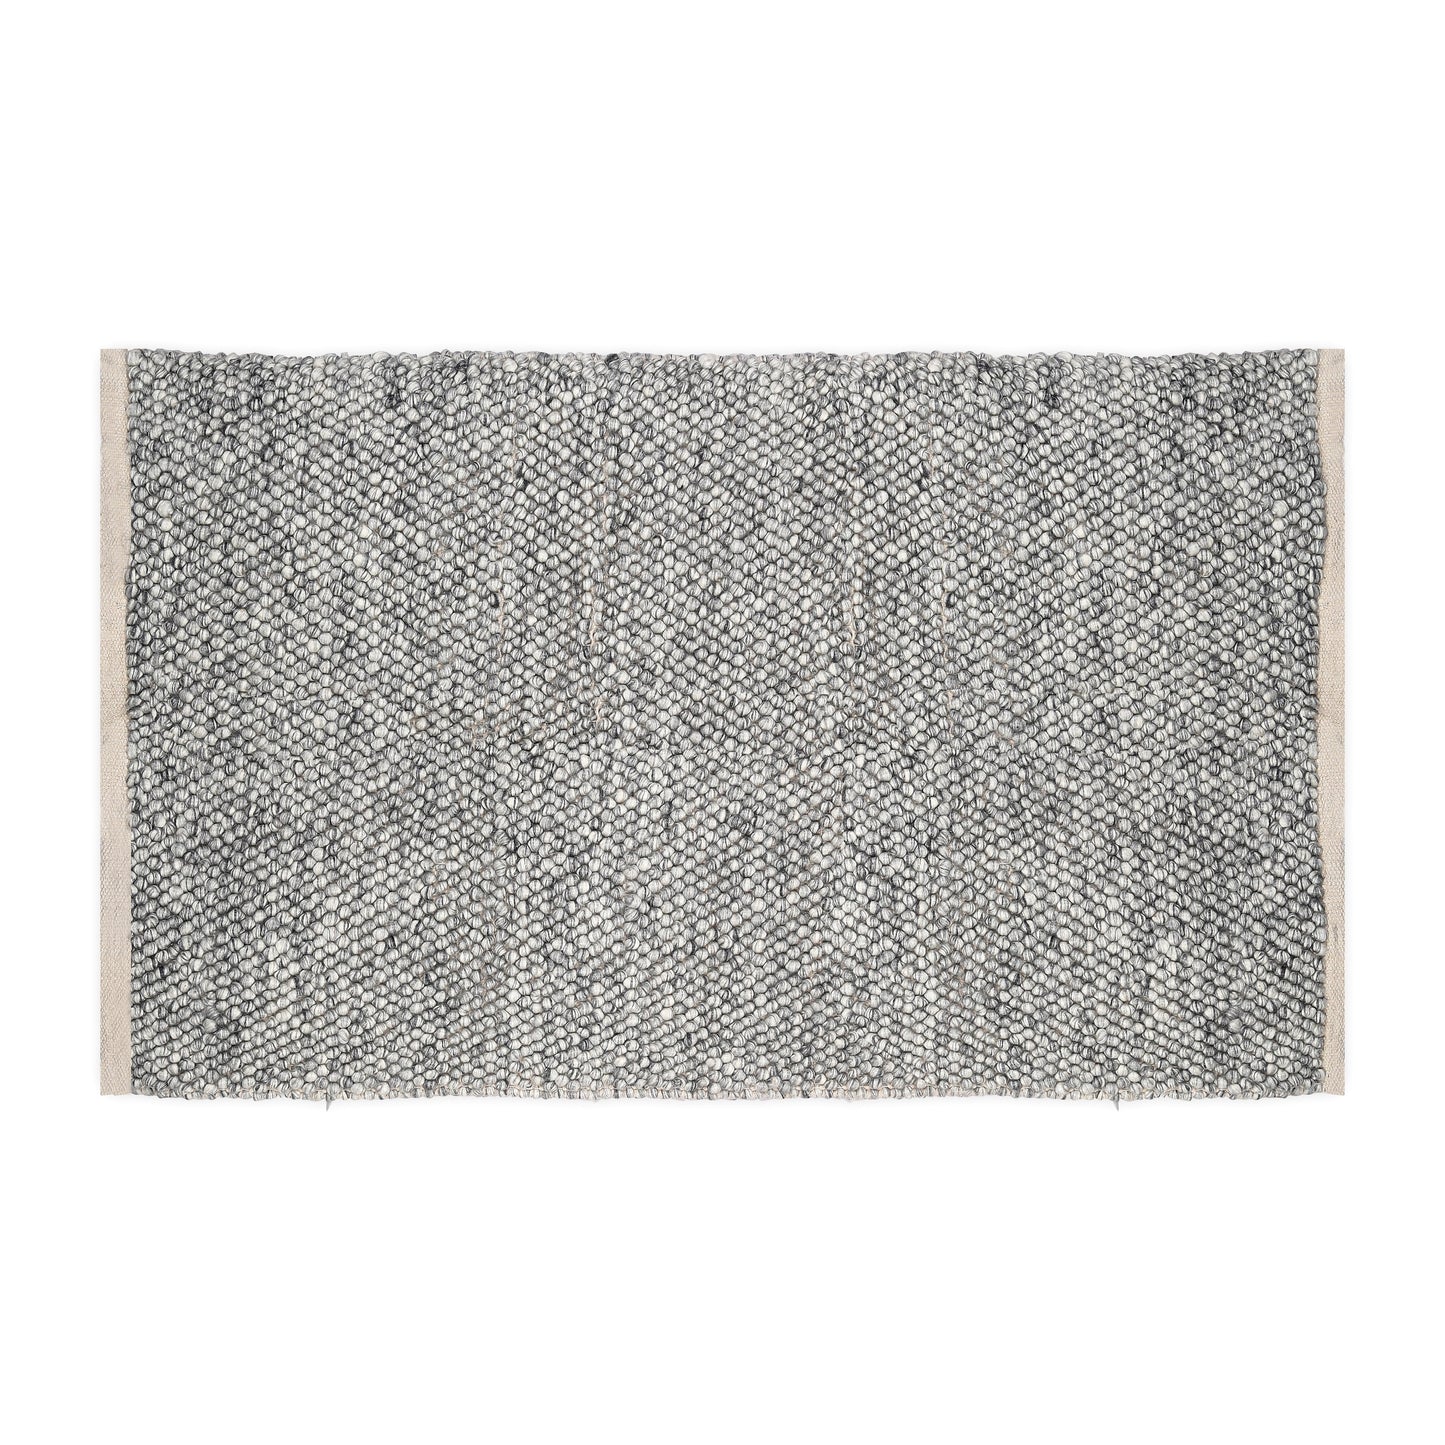 Hand Wool Area Rug  Gray Woven Straw Weave Pattern  1200